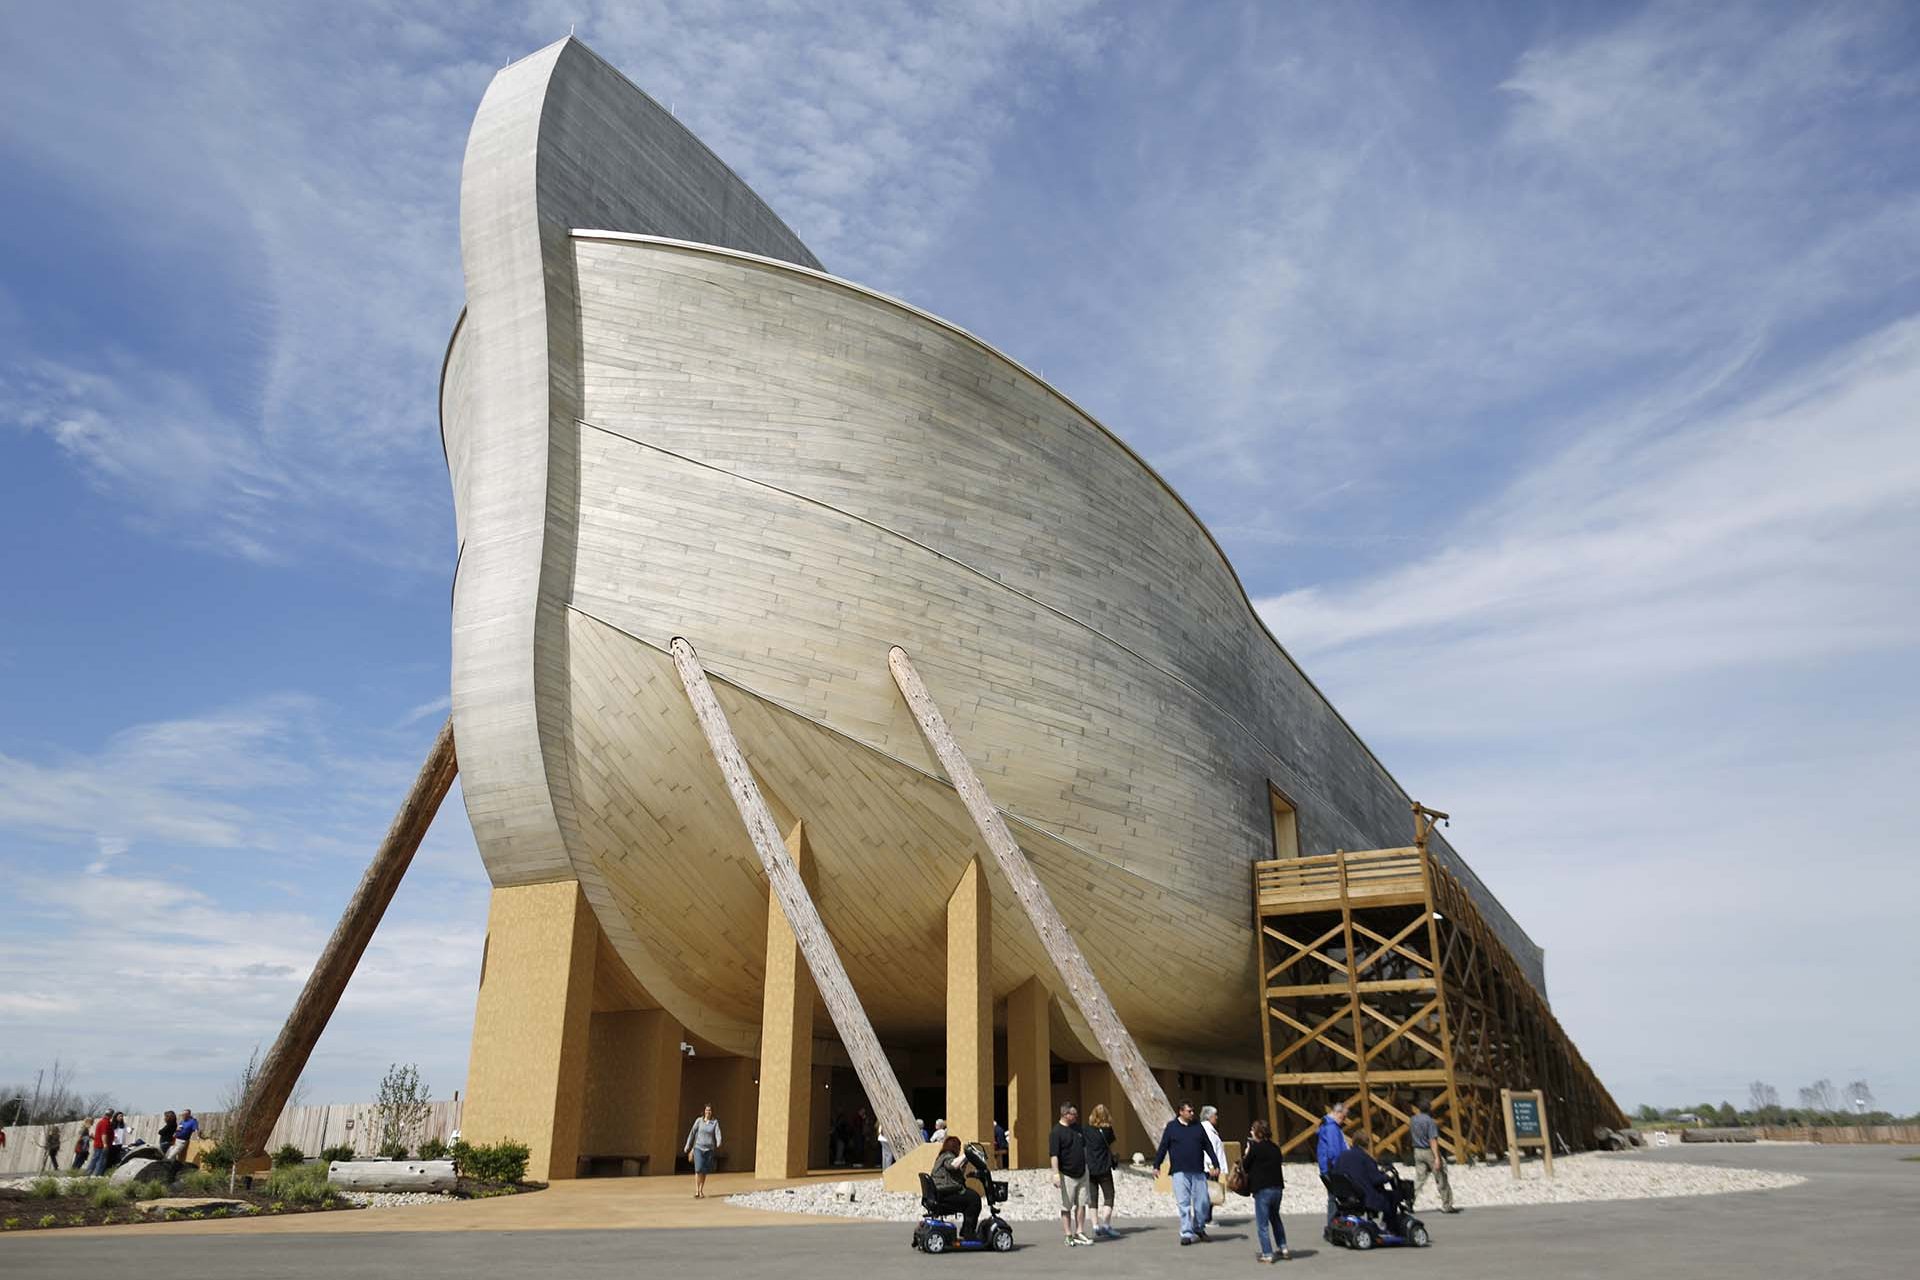 <p>This is probably the most curious building of all those on this list. Built of wood from the inside out, it is a replica of Noah's Ark designed by Troyer Group, a megastructure 137 meters or 550 feet long, 23m or 75 feet wide by 14 meters or 45 feet tall. It is located in Kentucky (United States) and which houses a museum about creation according to Christianity.</p>